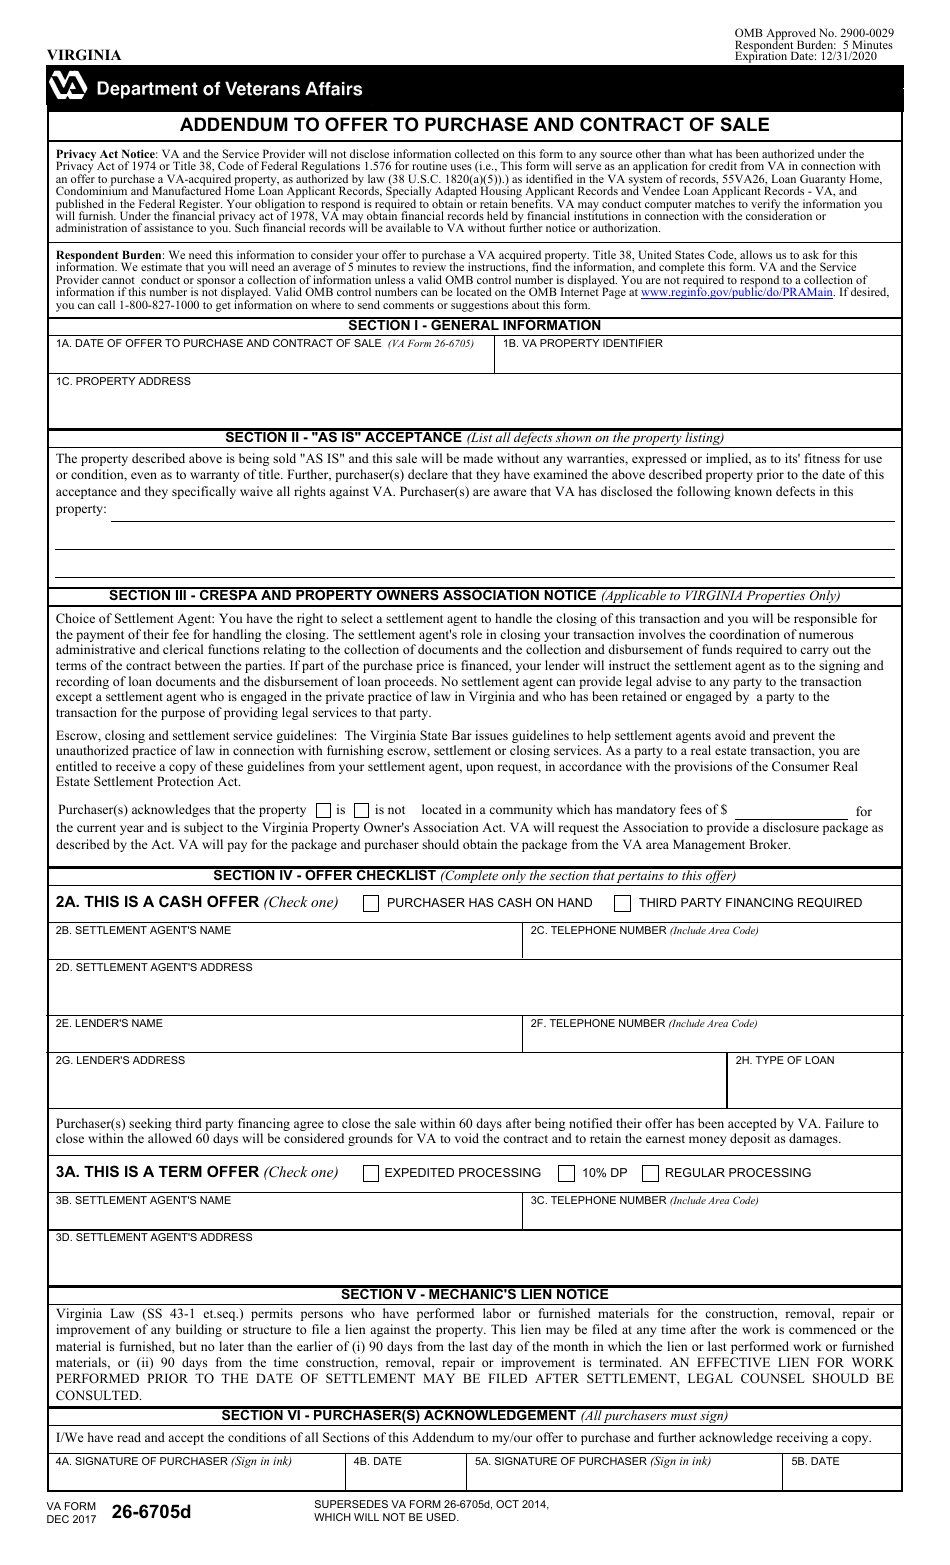 VA Form 26-6705D Addendum to Offer to Purchase and Contract of Sale, Page 1